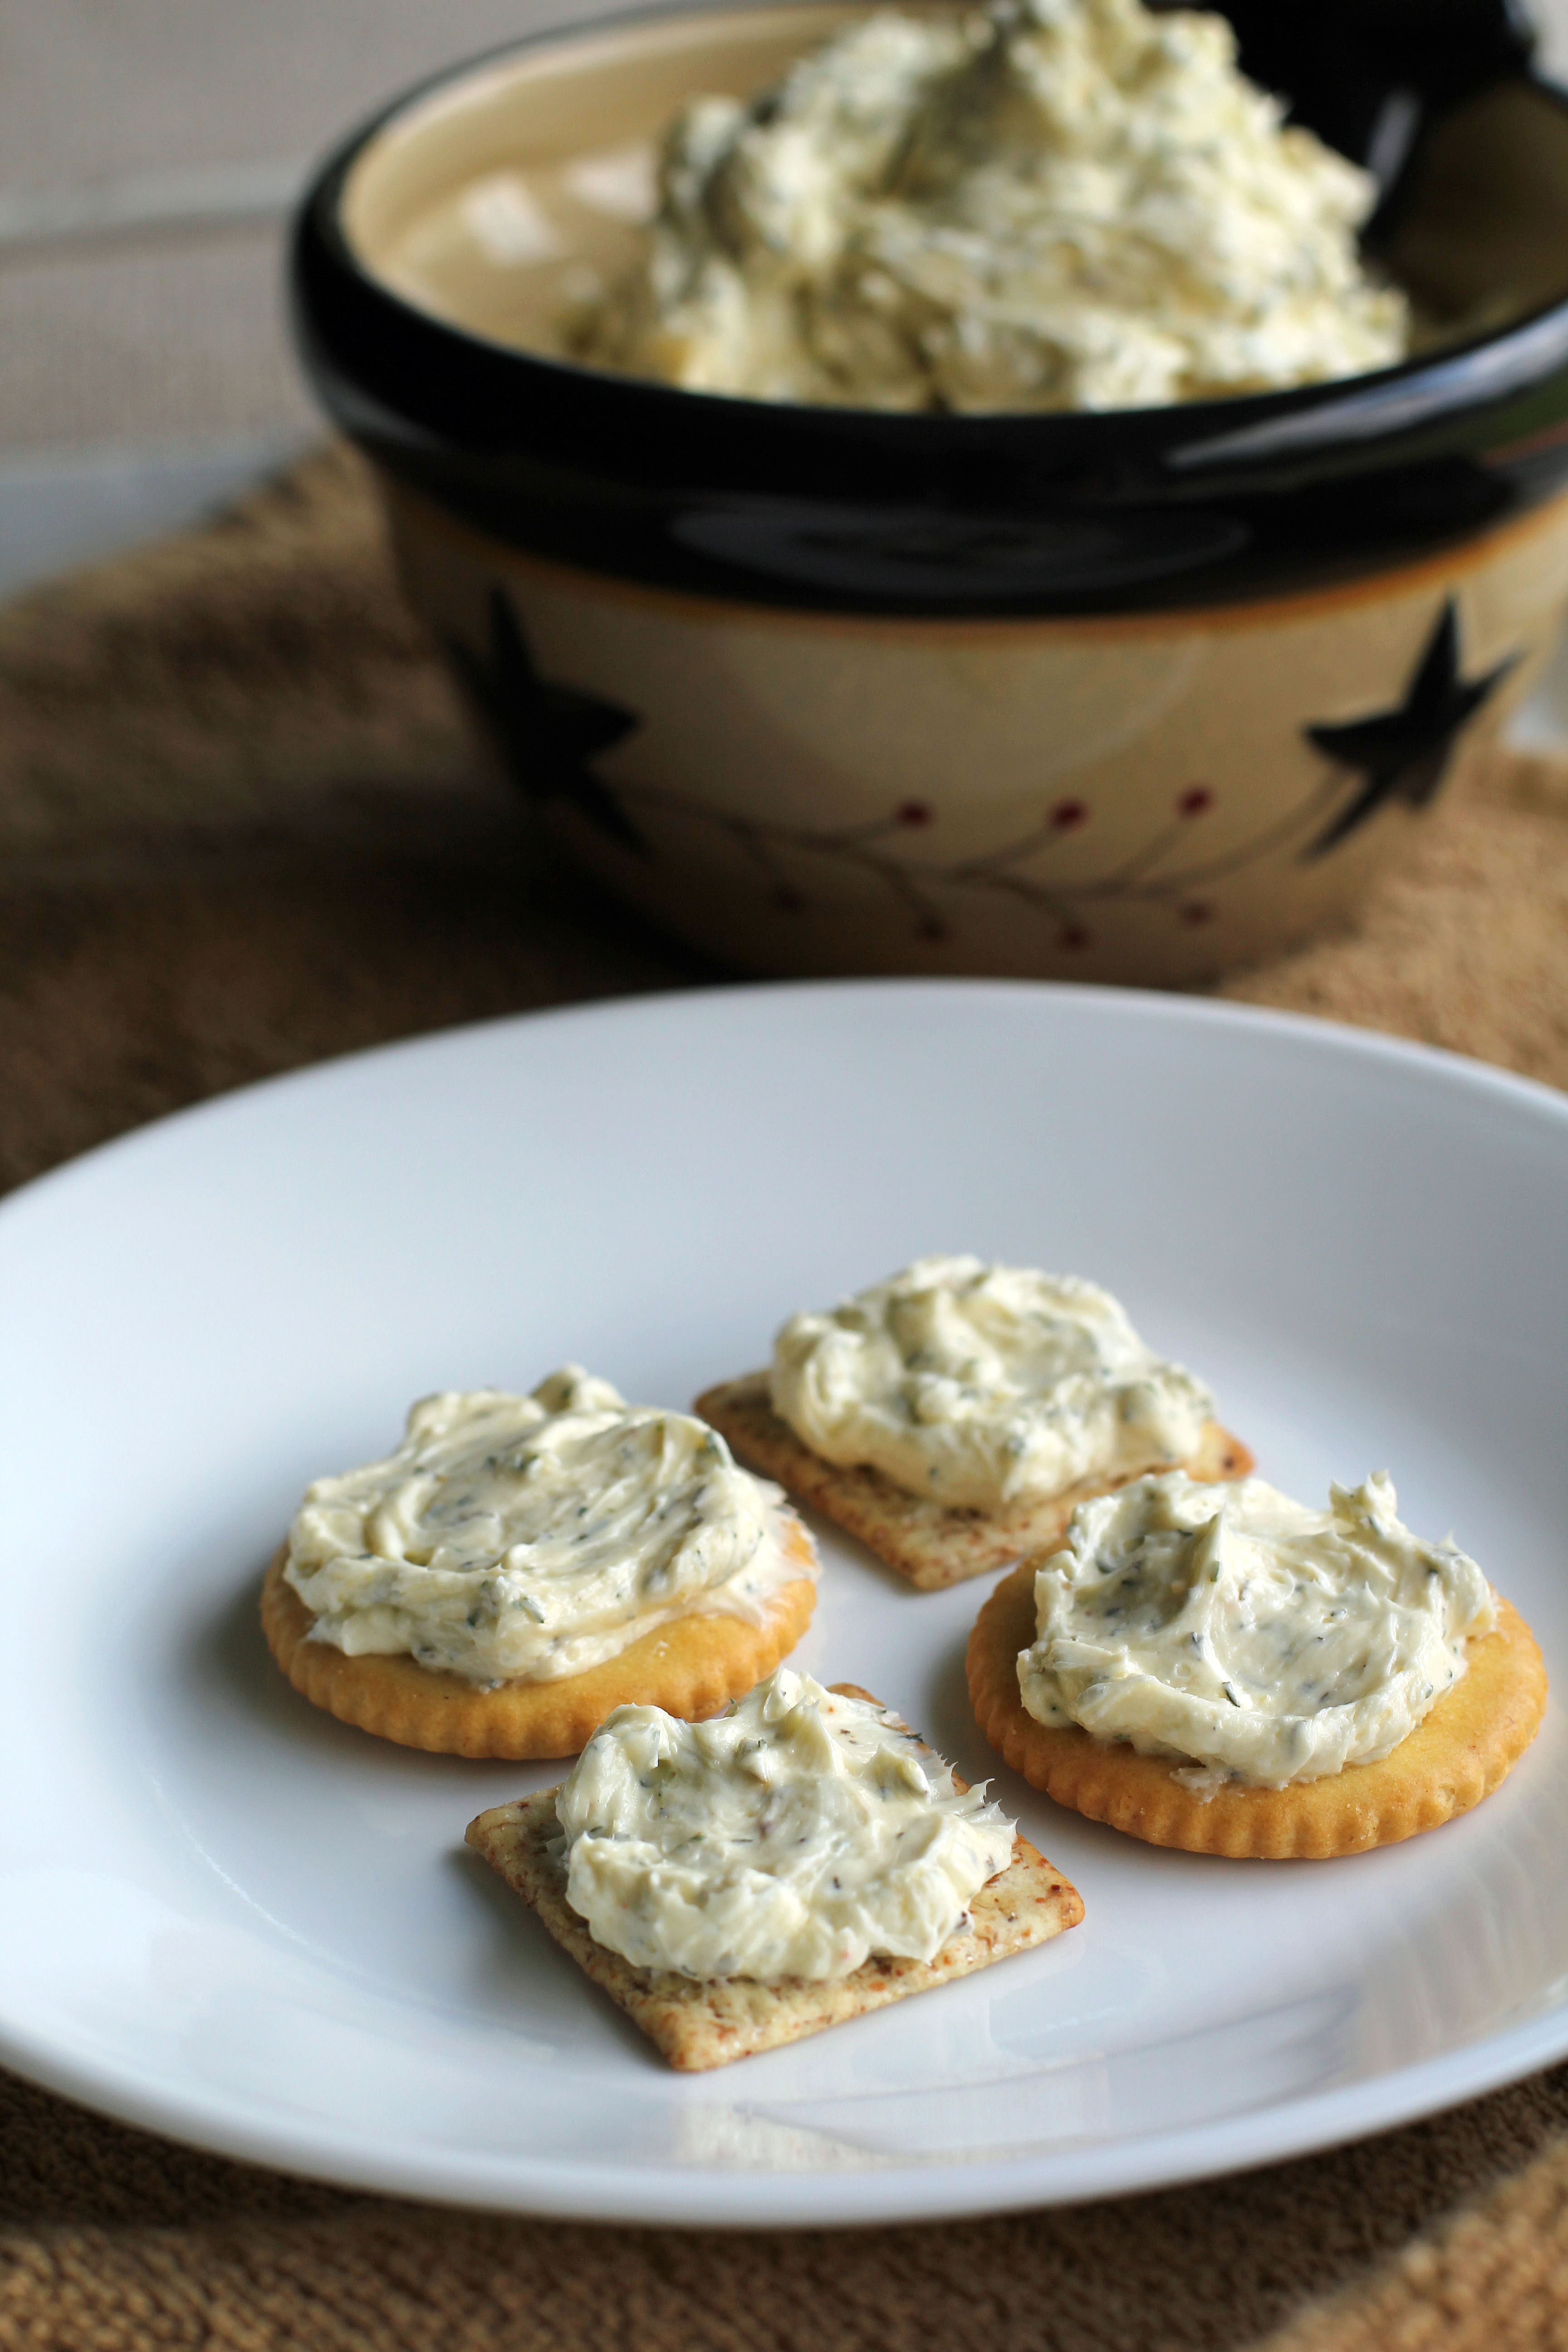 Herb and Garlic Cheese Spread